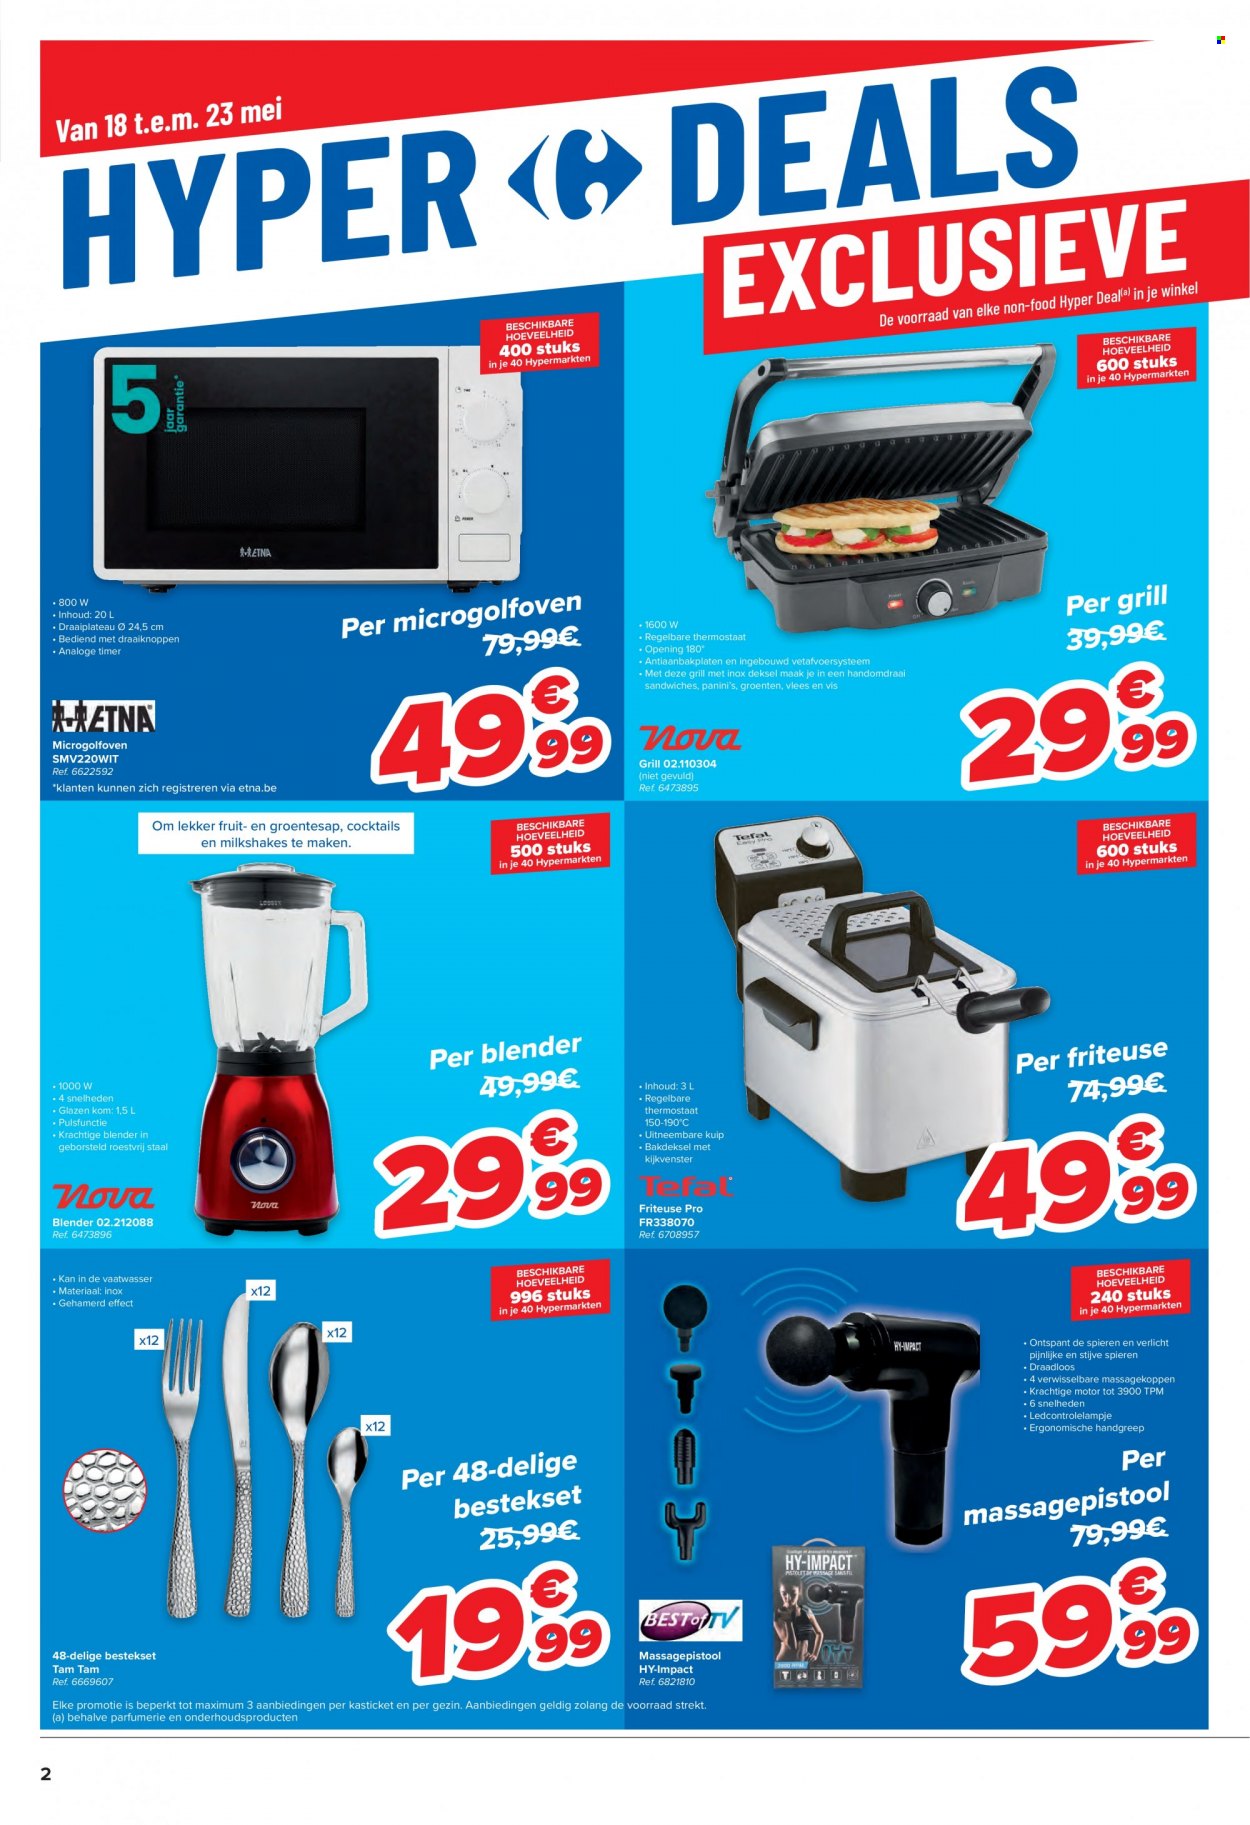 Catalogue Carrefour hypermarkt - 18.5.2022 - 23.5.2022. Page 2.